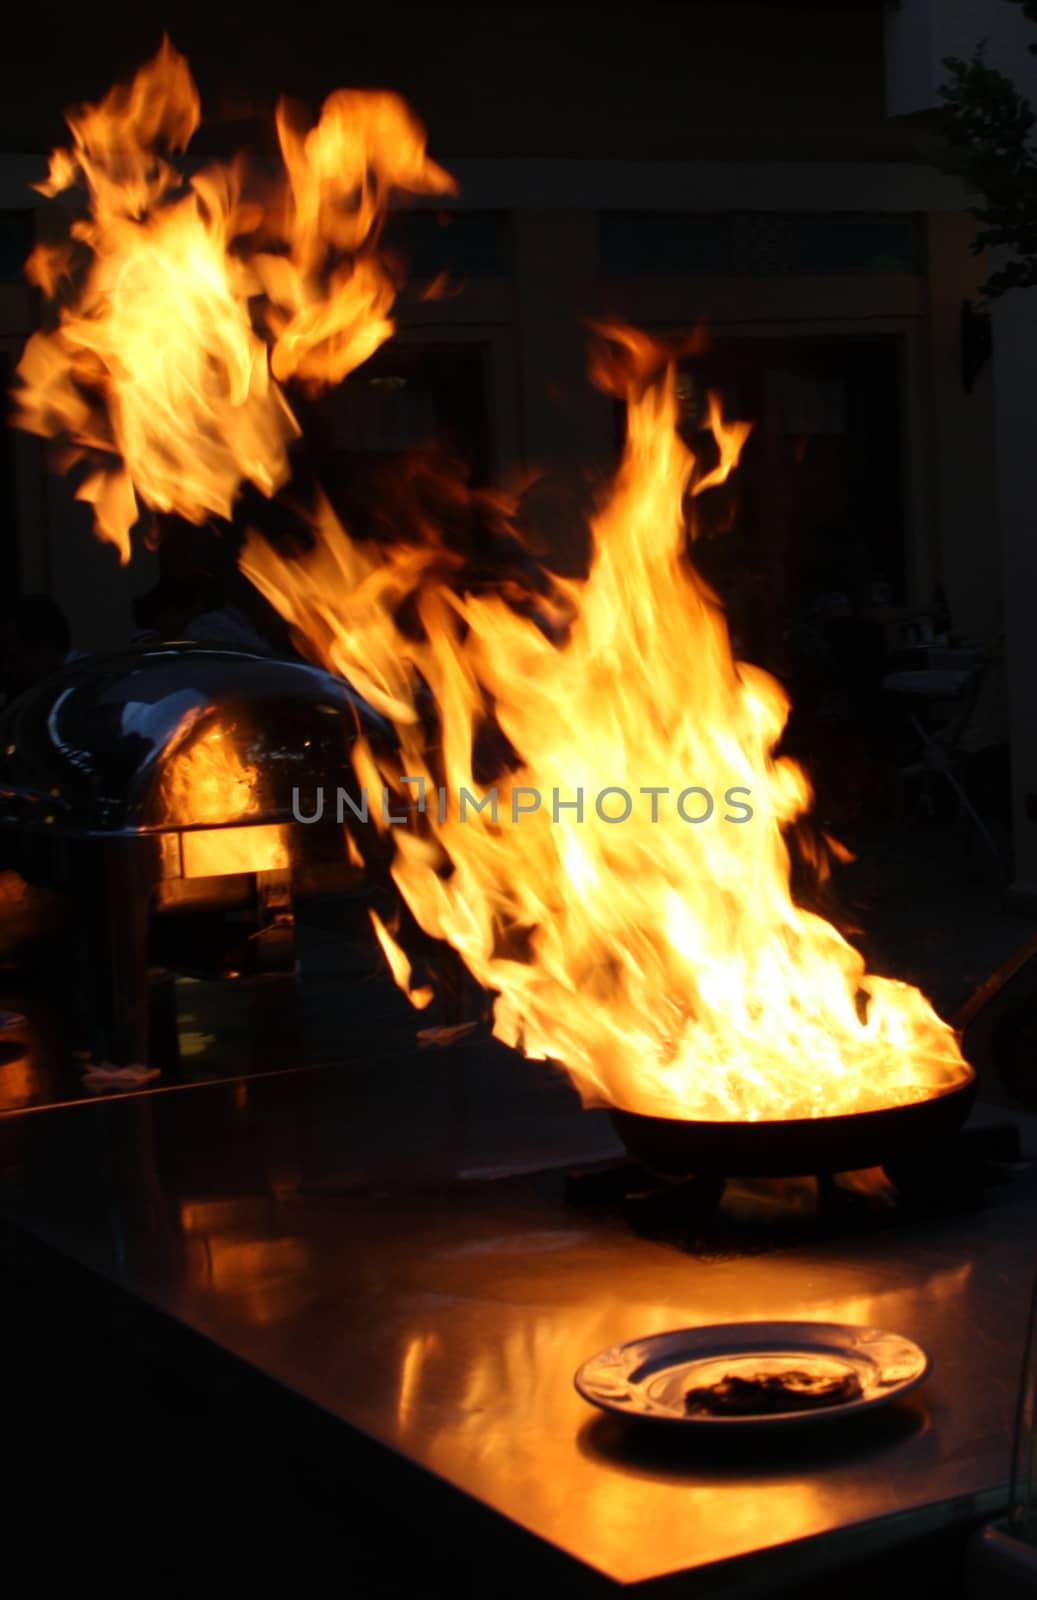 Fire gas burn is cooking on iron pan by alexx60